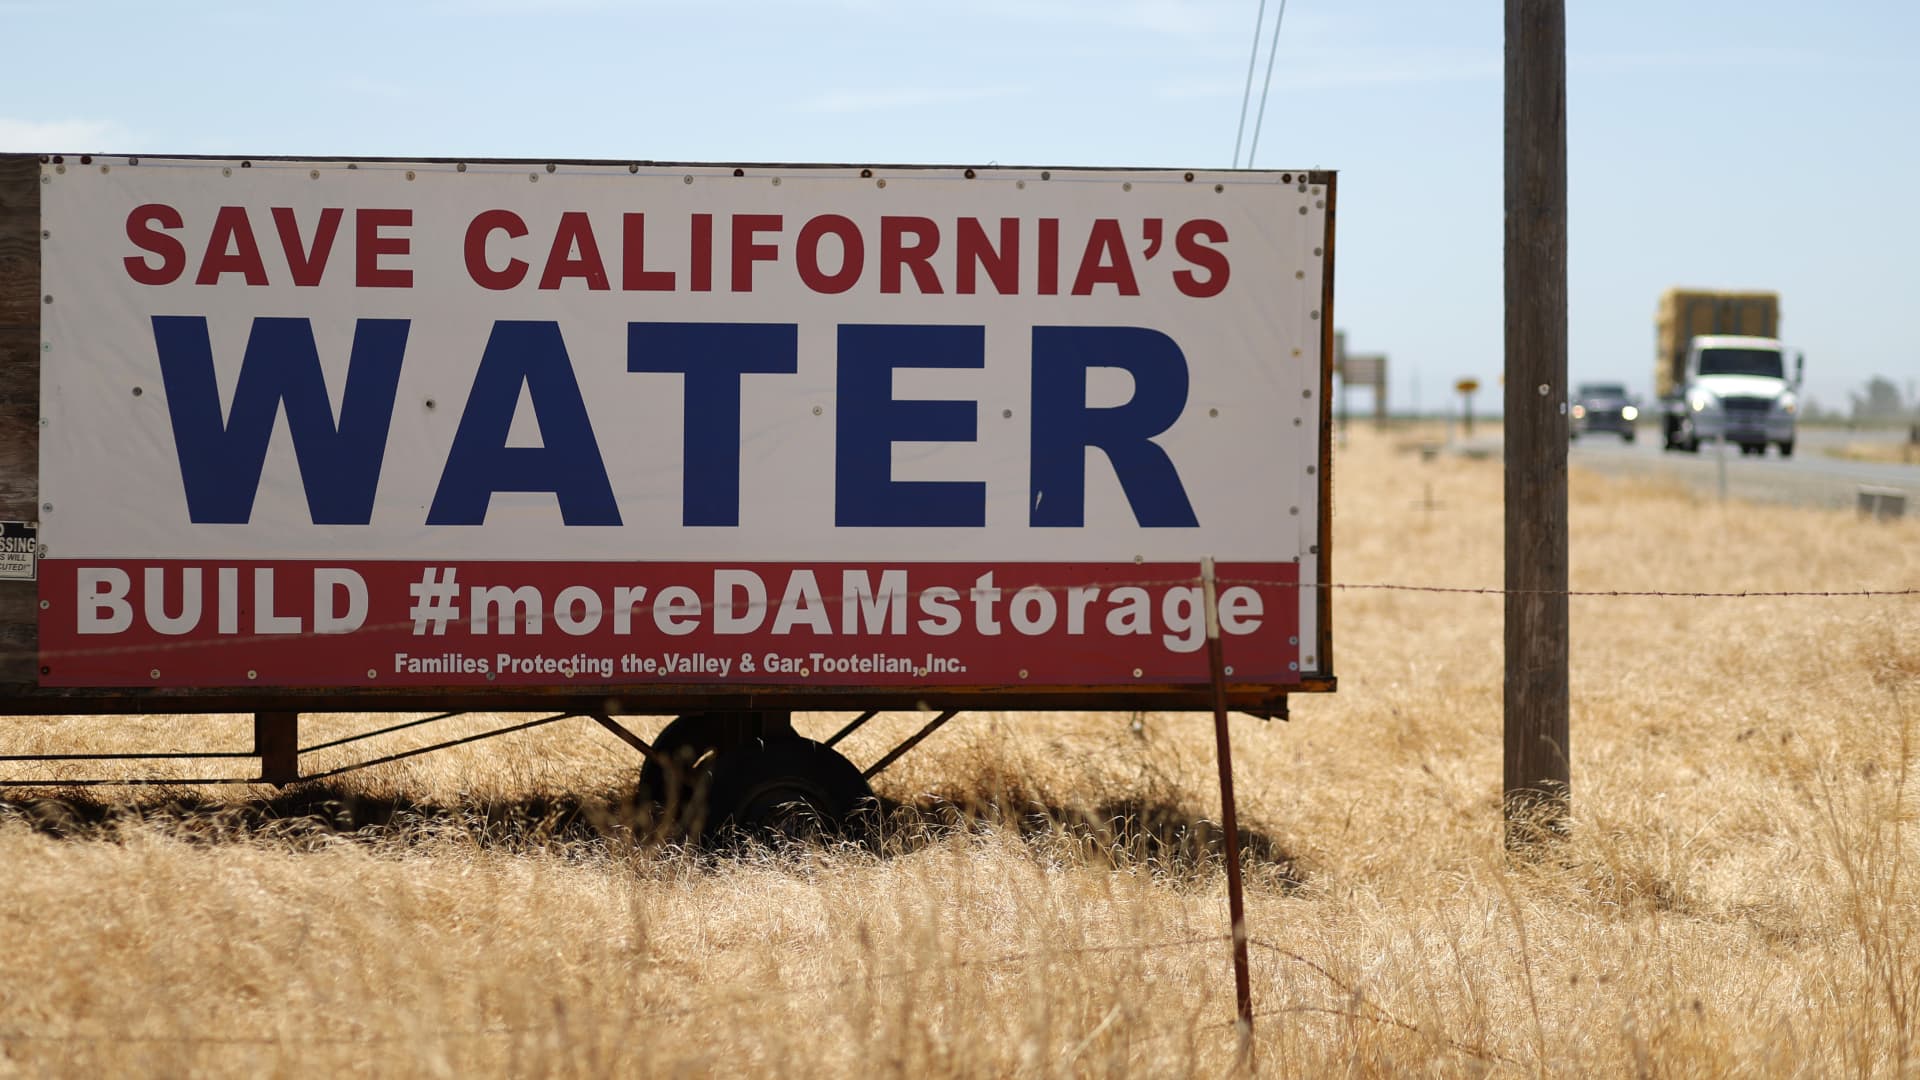 A sign is posted next to an empty field on May 27, 2021 in Chowchilla, California.